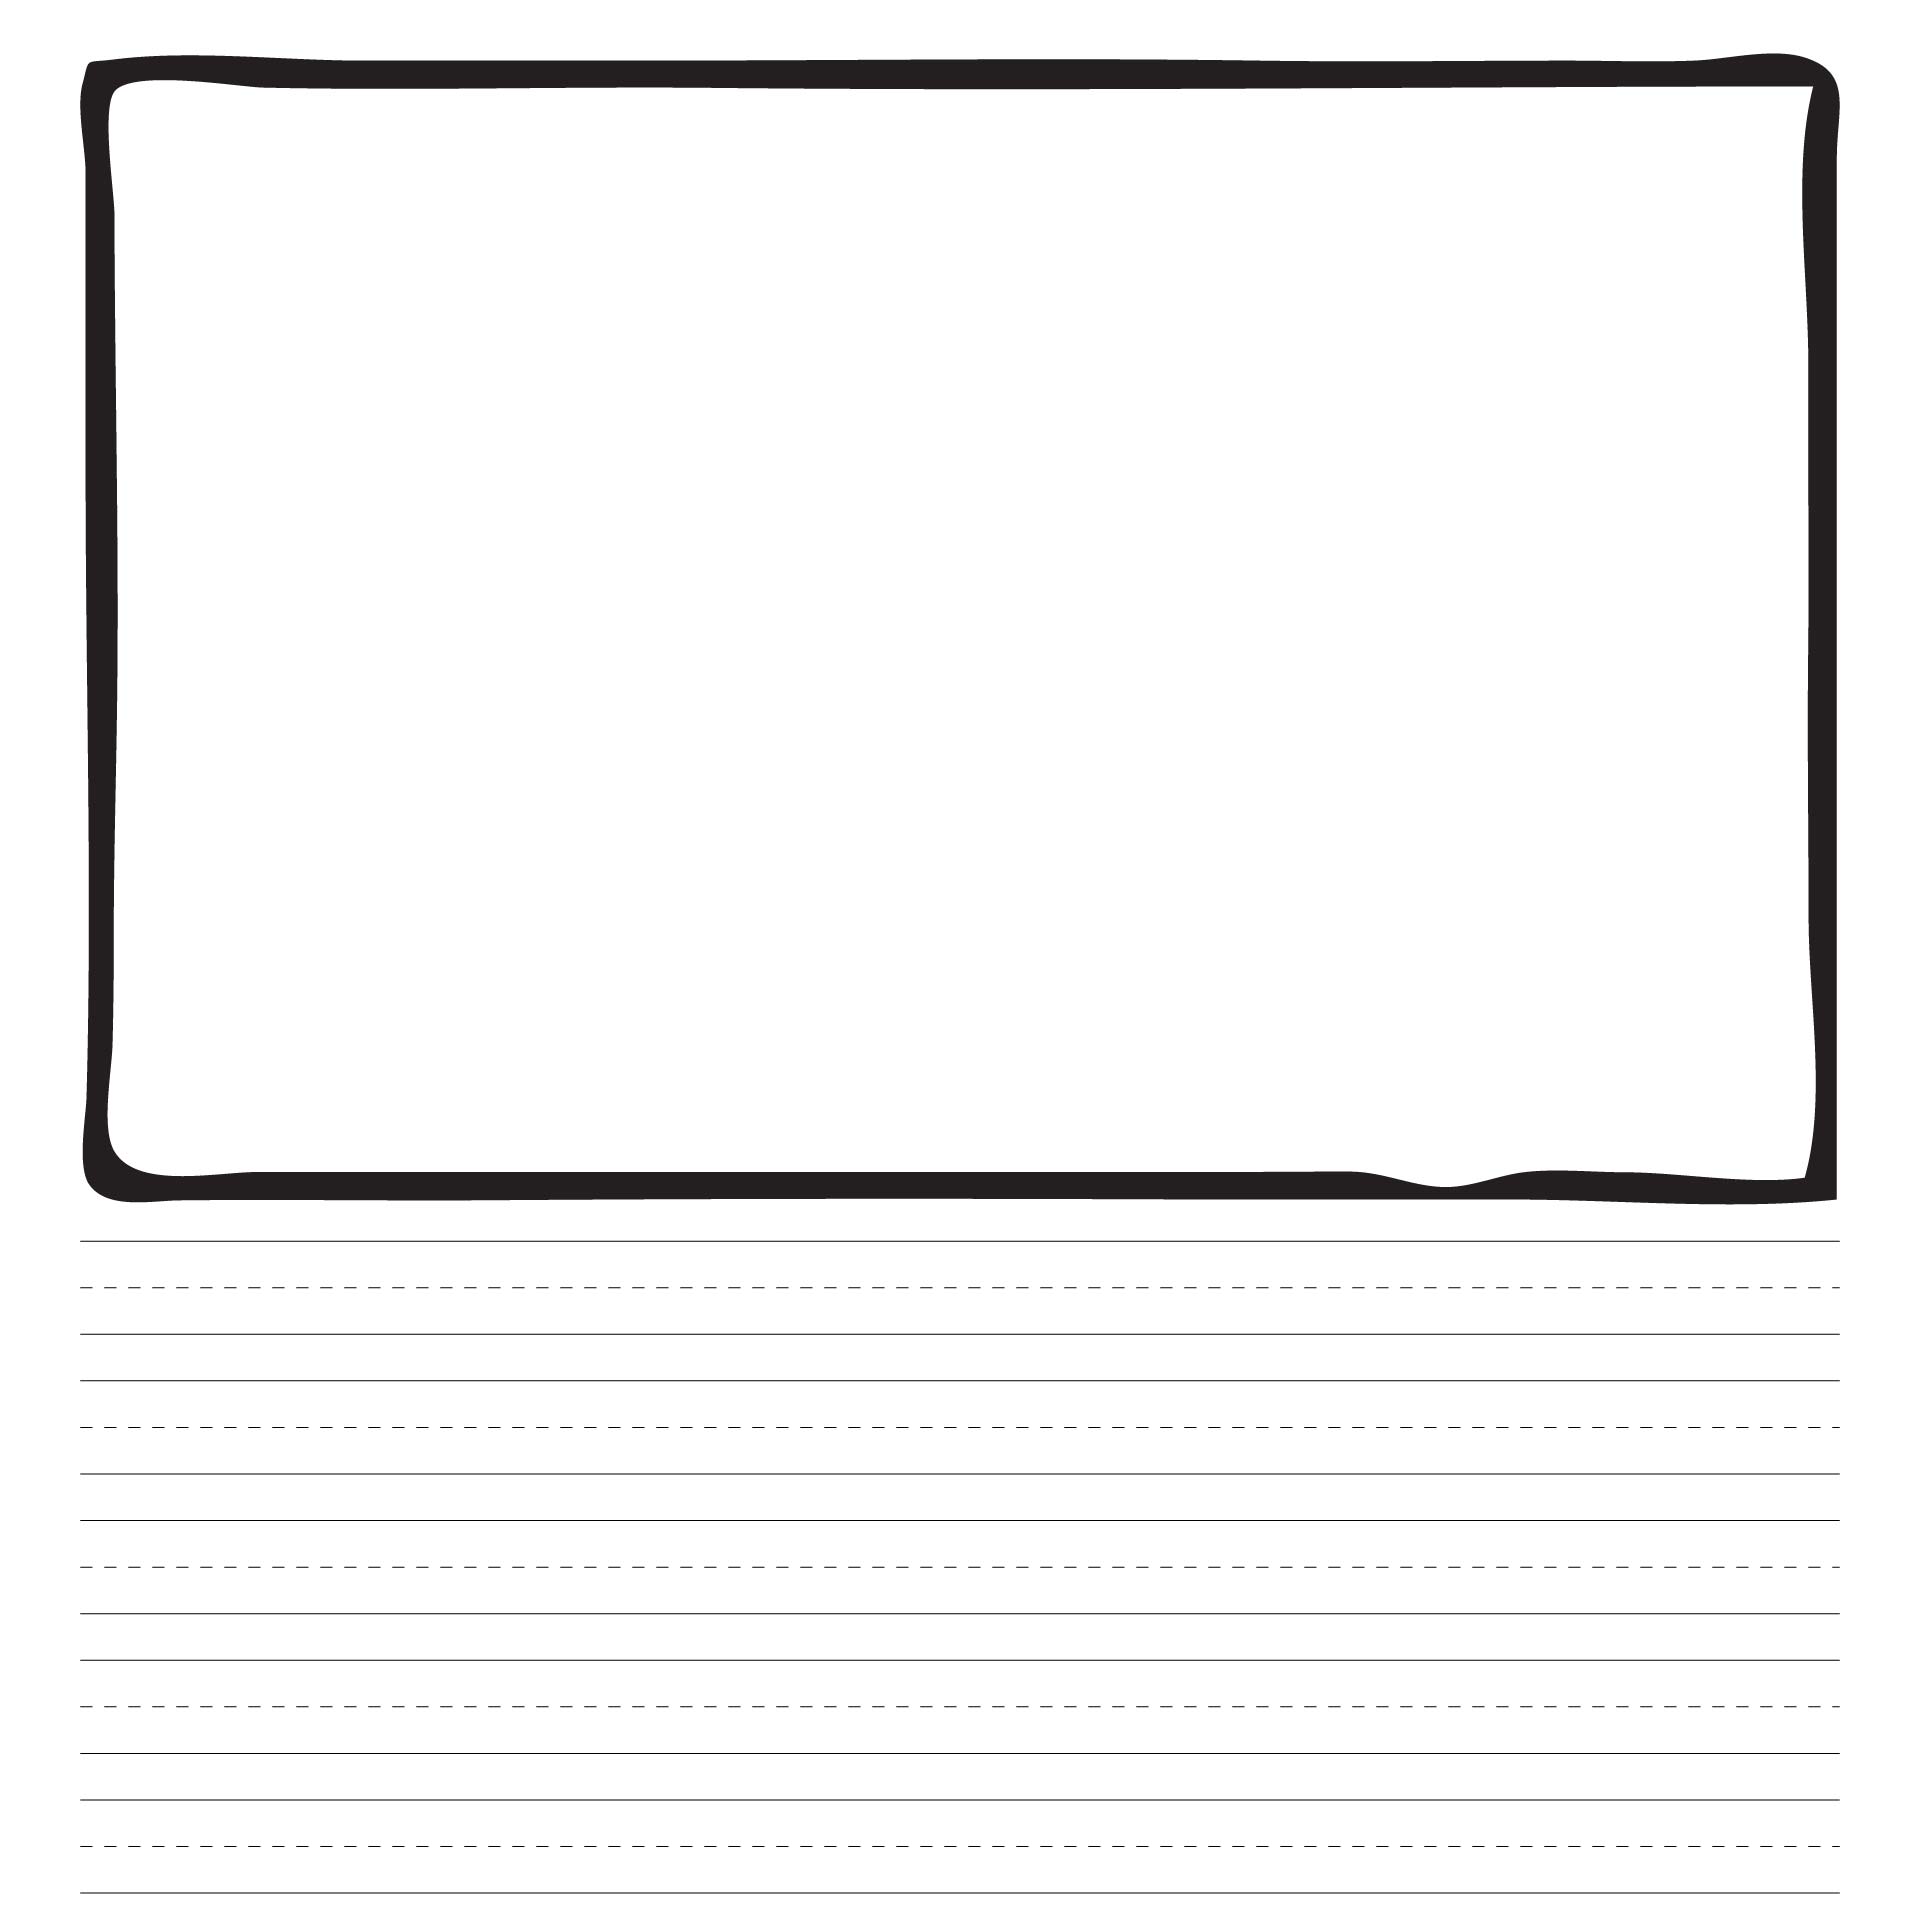 8 Best Images of First Grade Printable Paper Like - Printable First